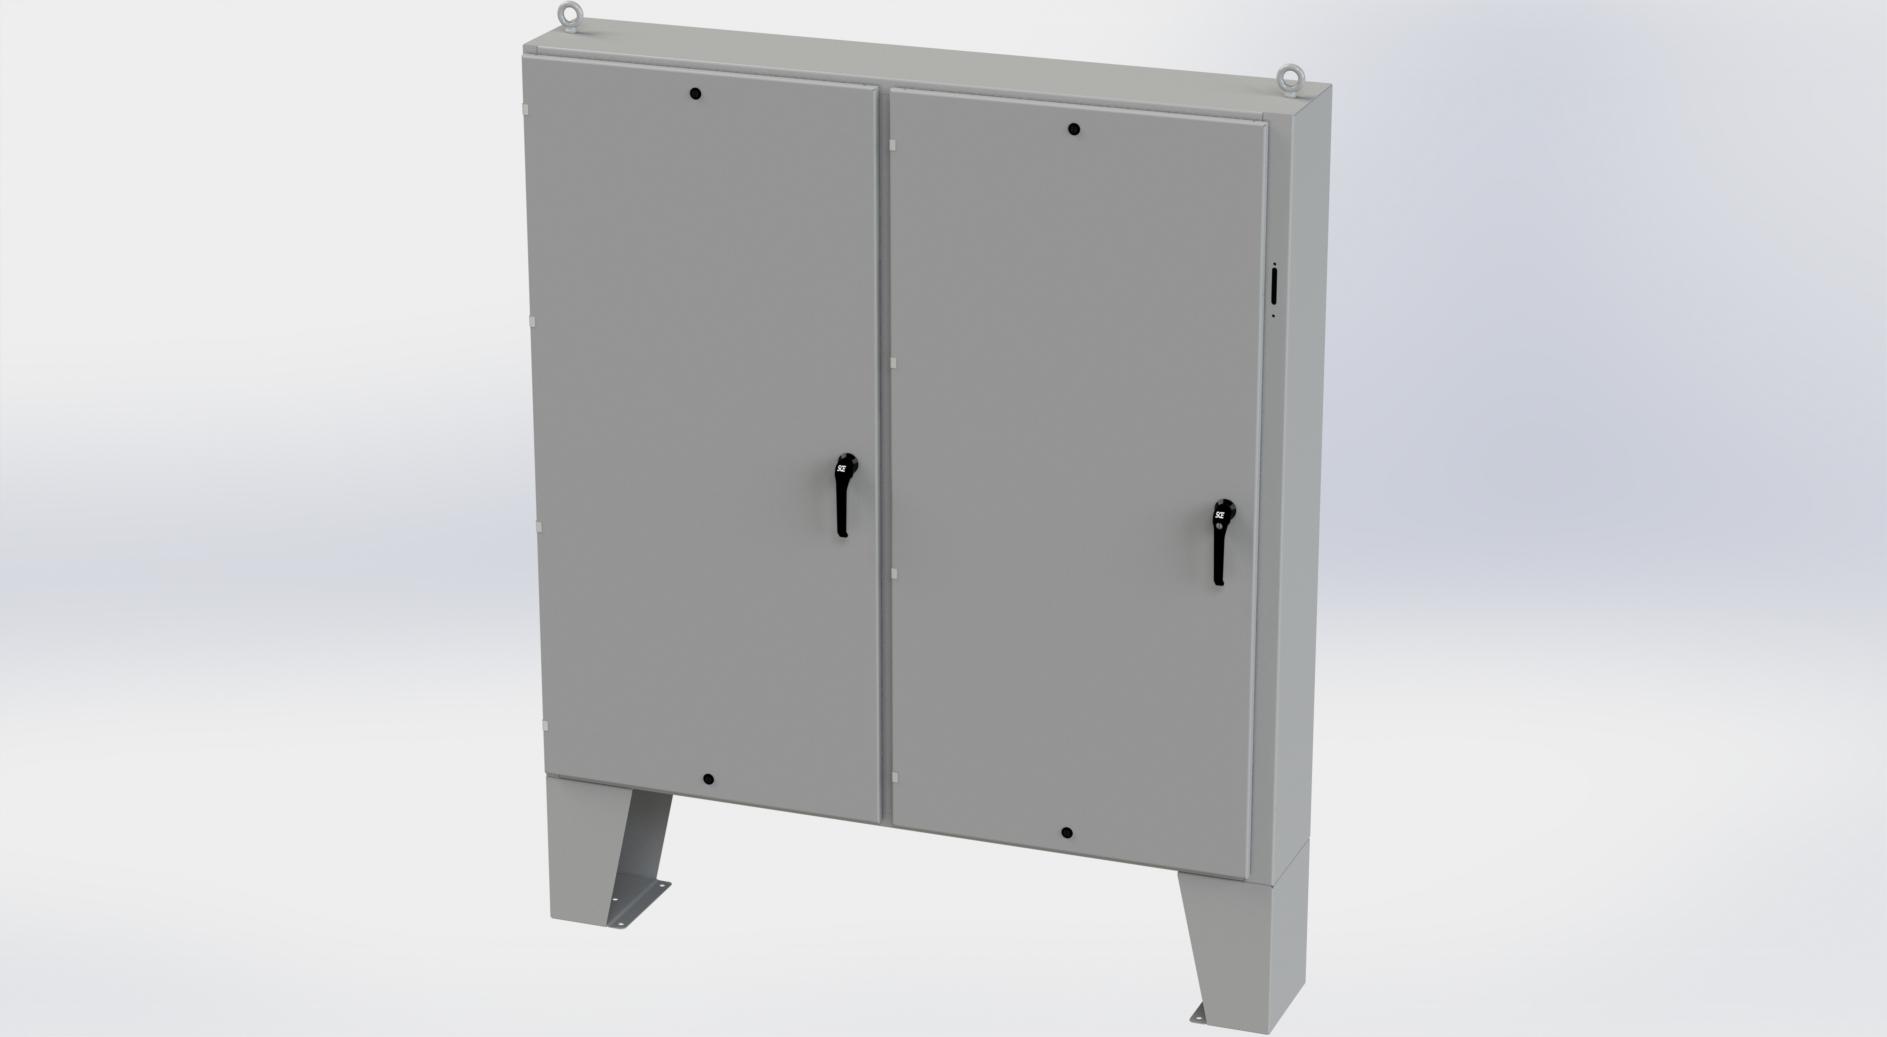 Saginaw Control SCE-72XEL7312LP 2DR XEL Enclosure, Height:72.00", Width:73.00", Depth:12.00", ANSI-61 gray powder coating inside and out. Optional sub-panels are powder coated white.